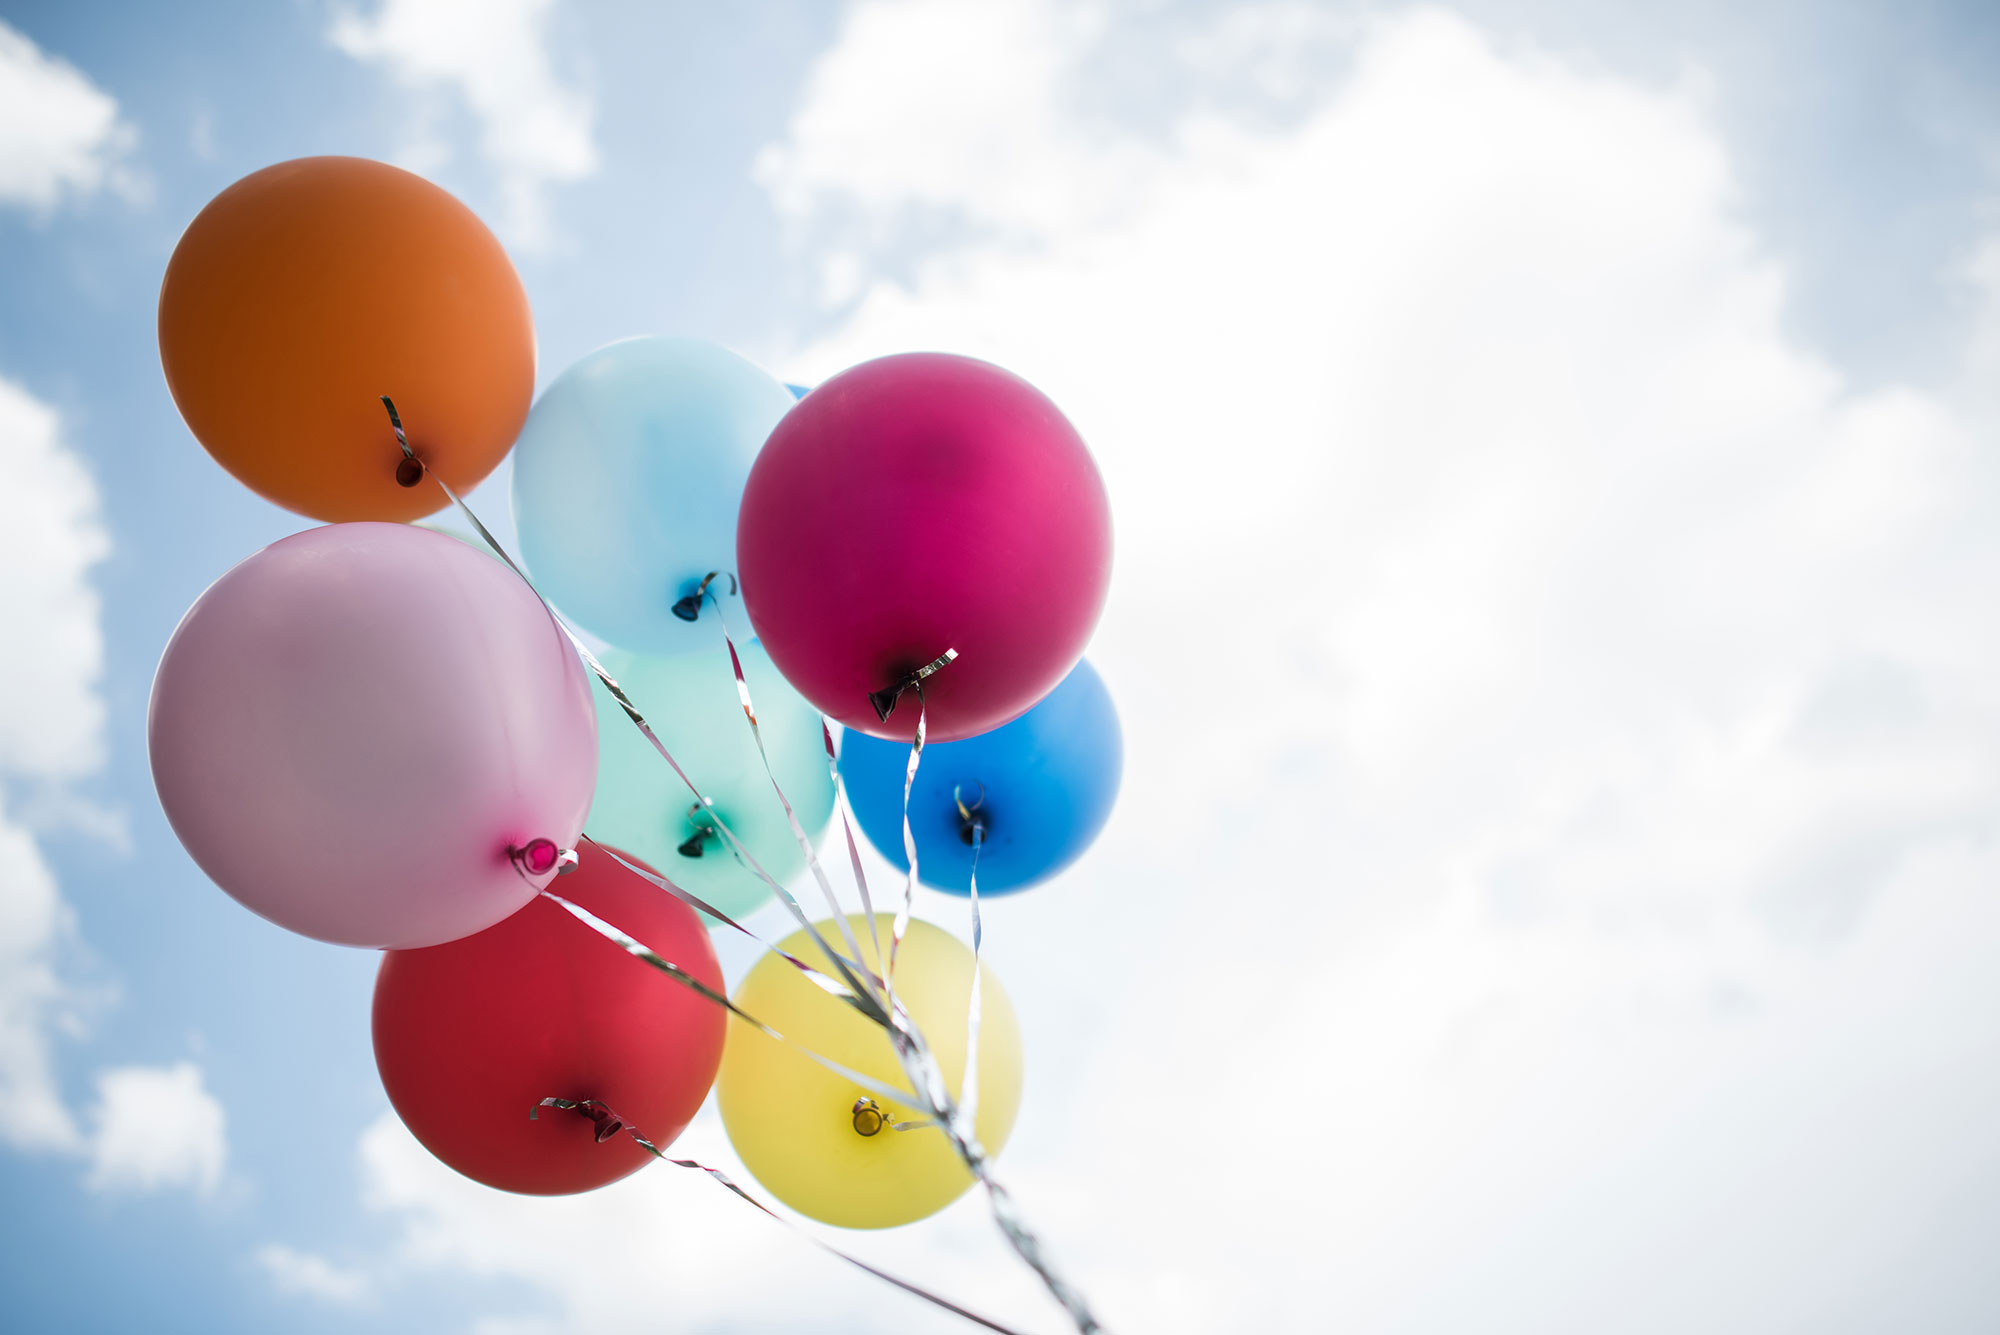 A set of eight balloons in different colors are seen against the background of a cloudy sky.